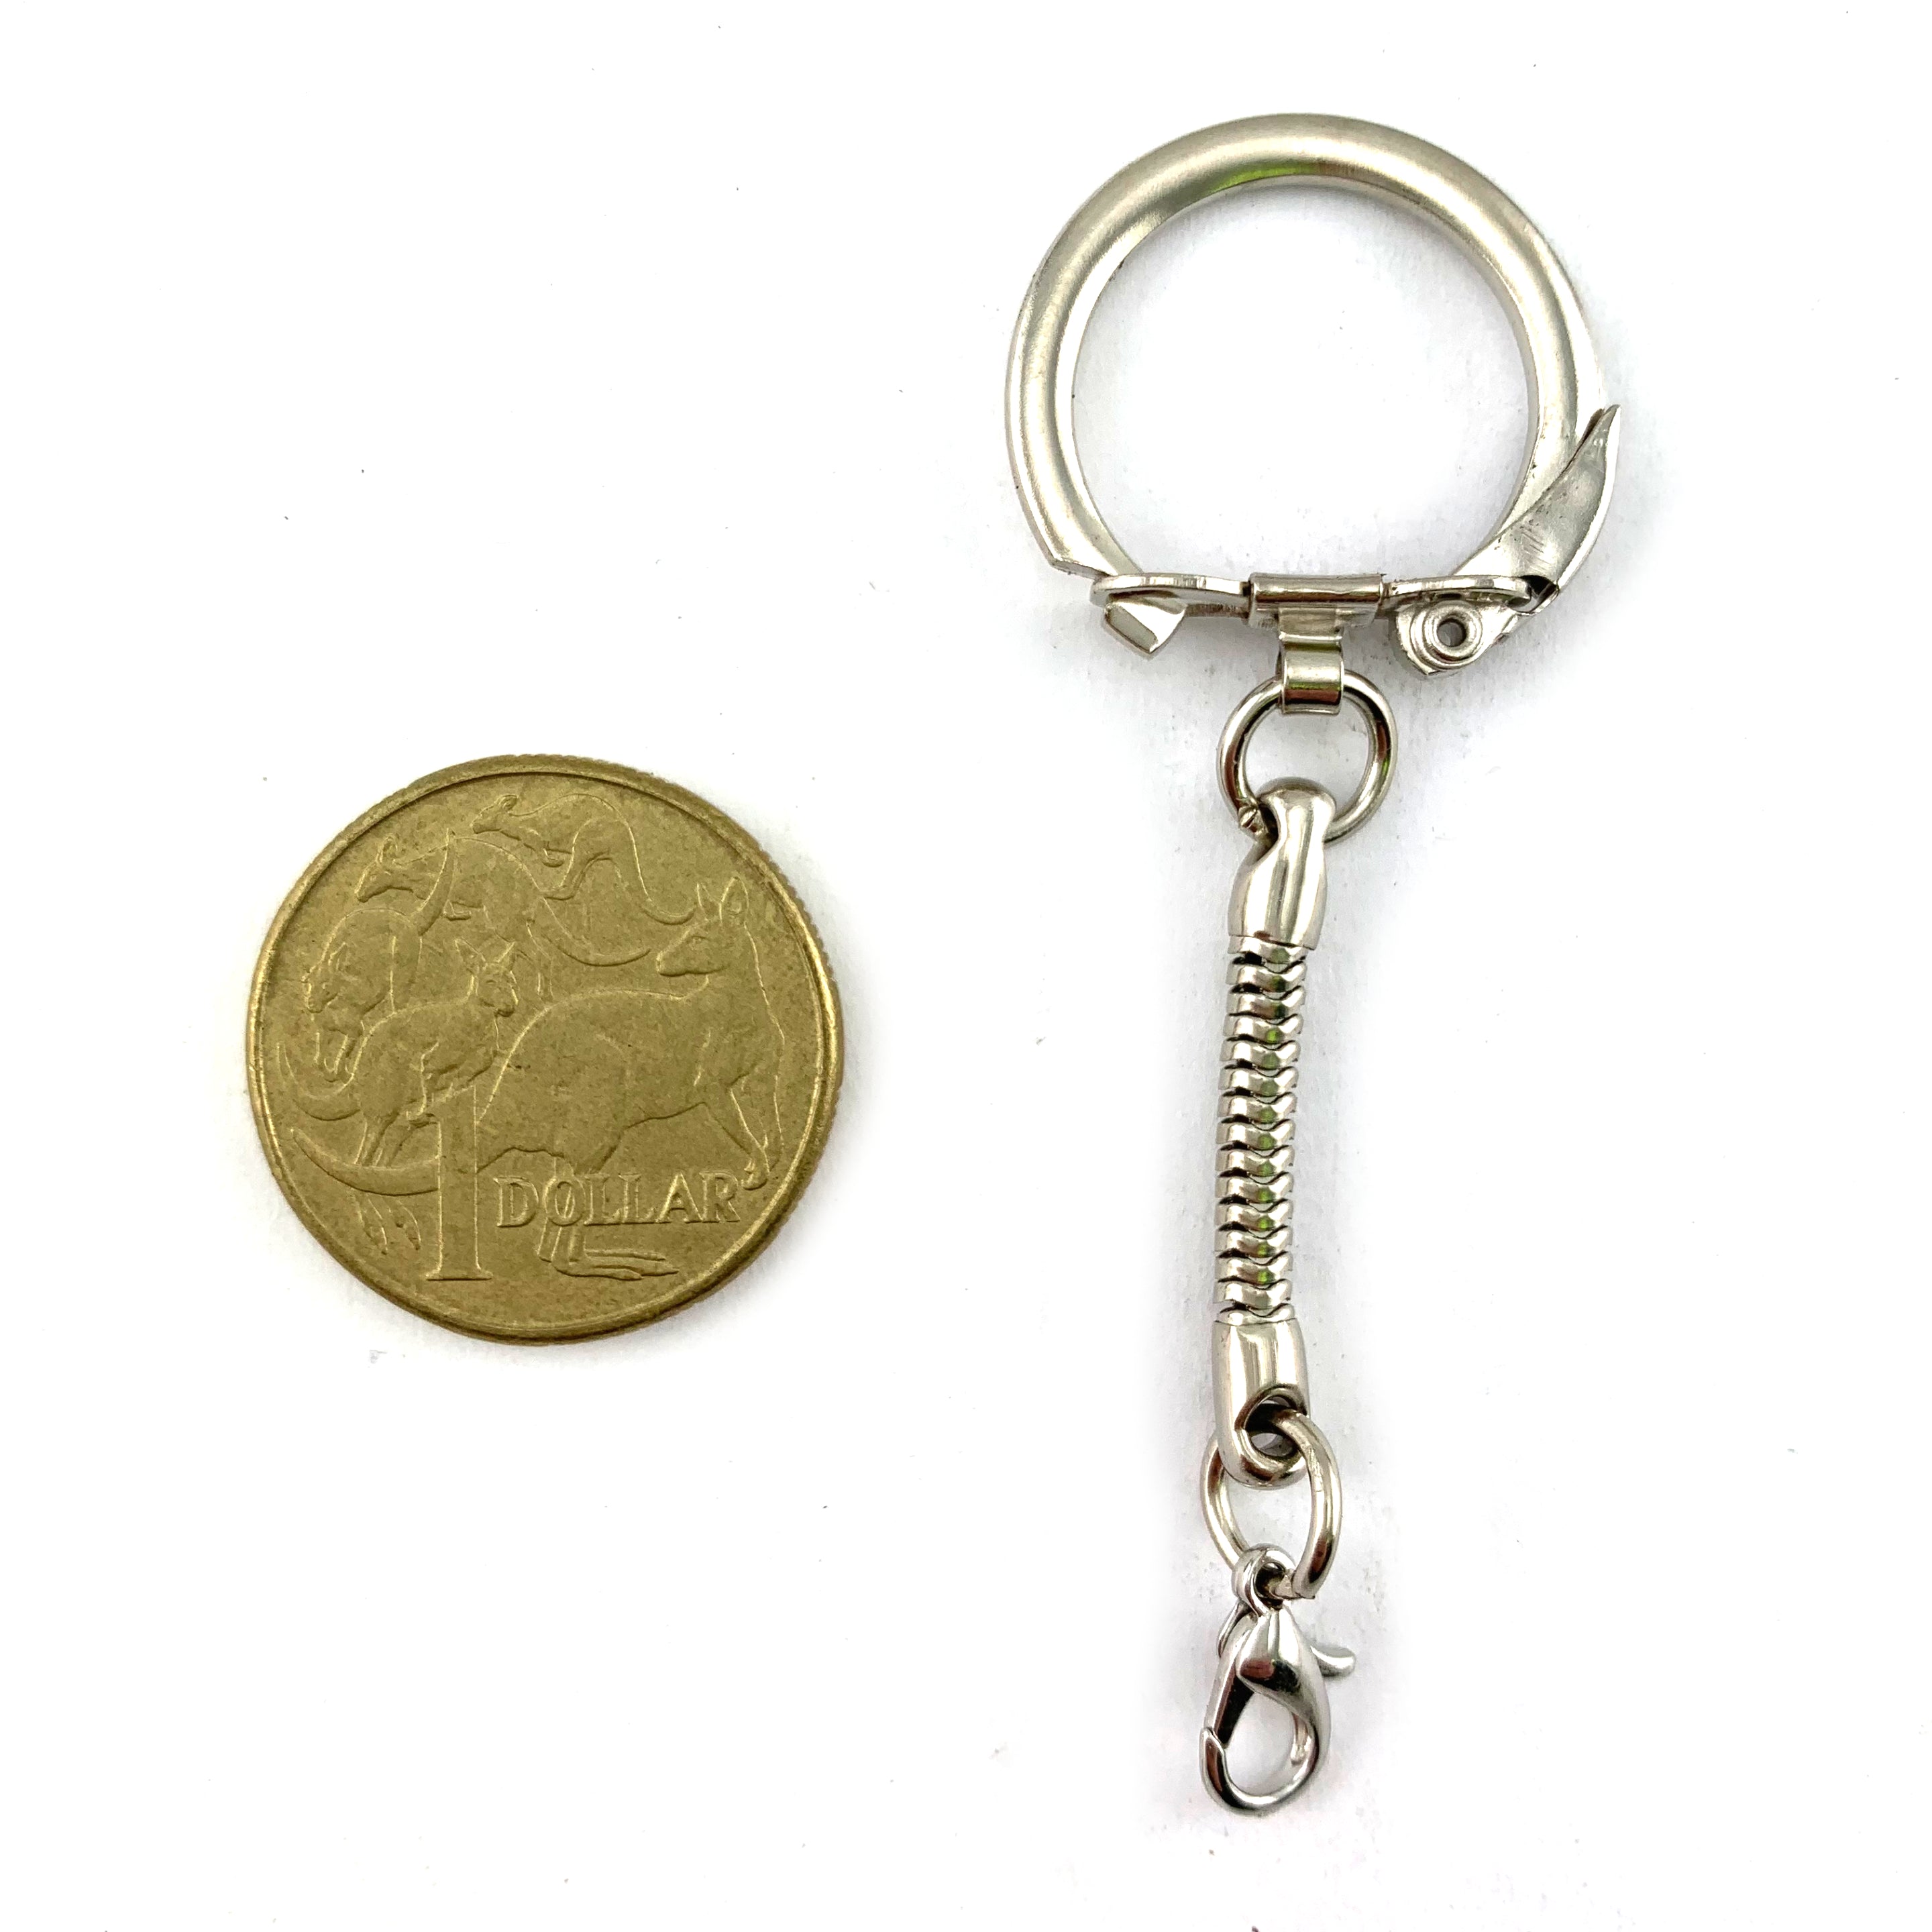 Nickel key chains with a beautiful high polished finish. Melbourne and Australia wide.